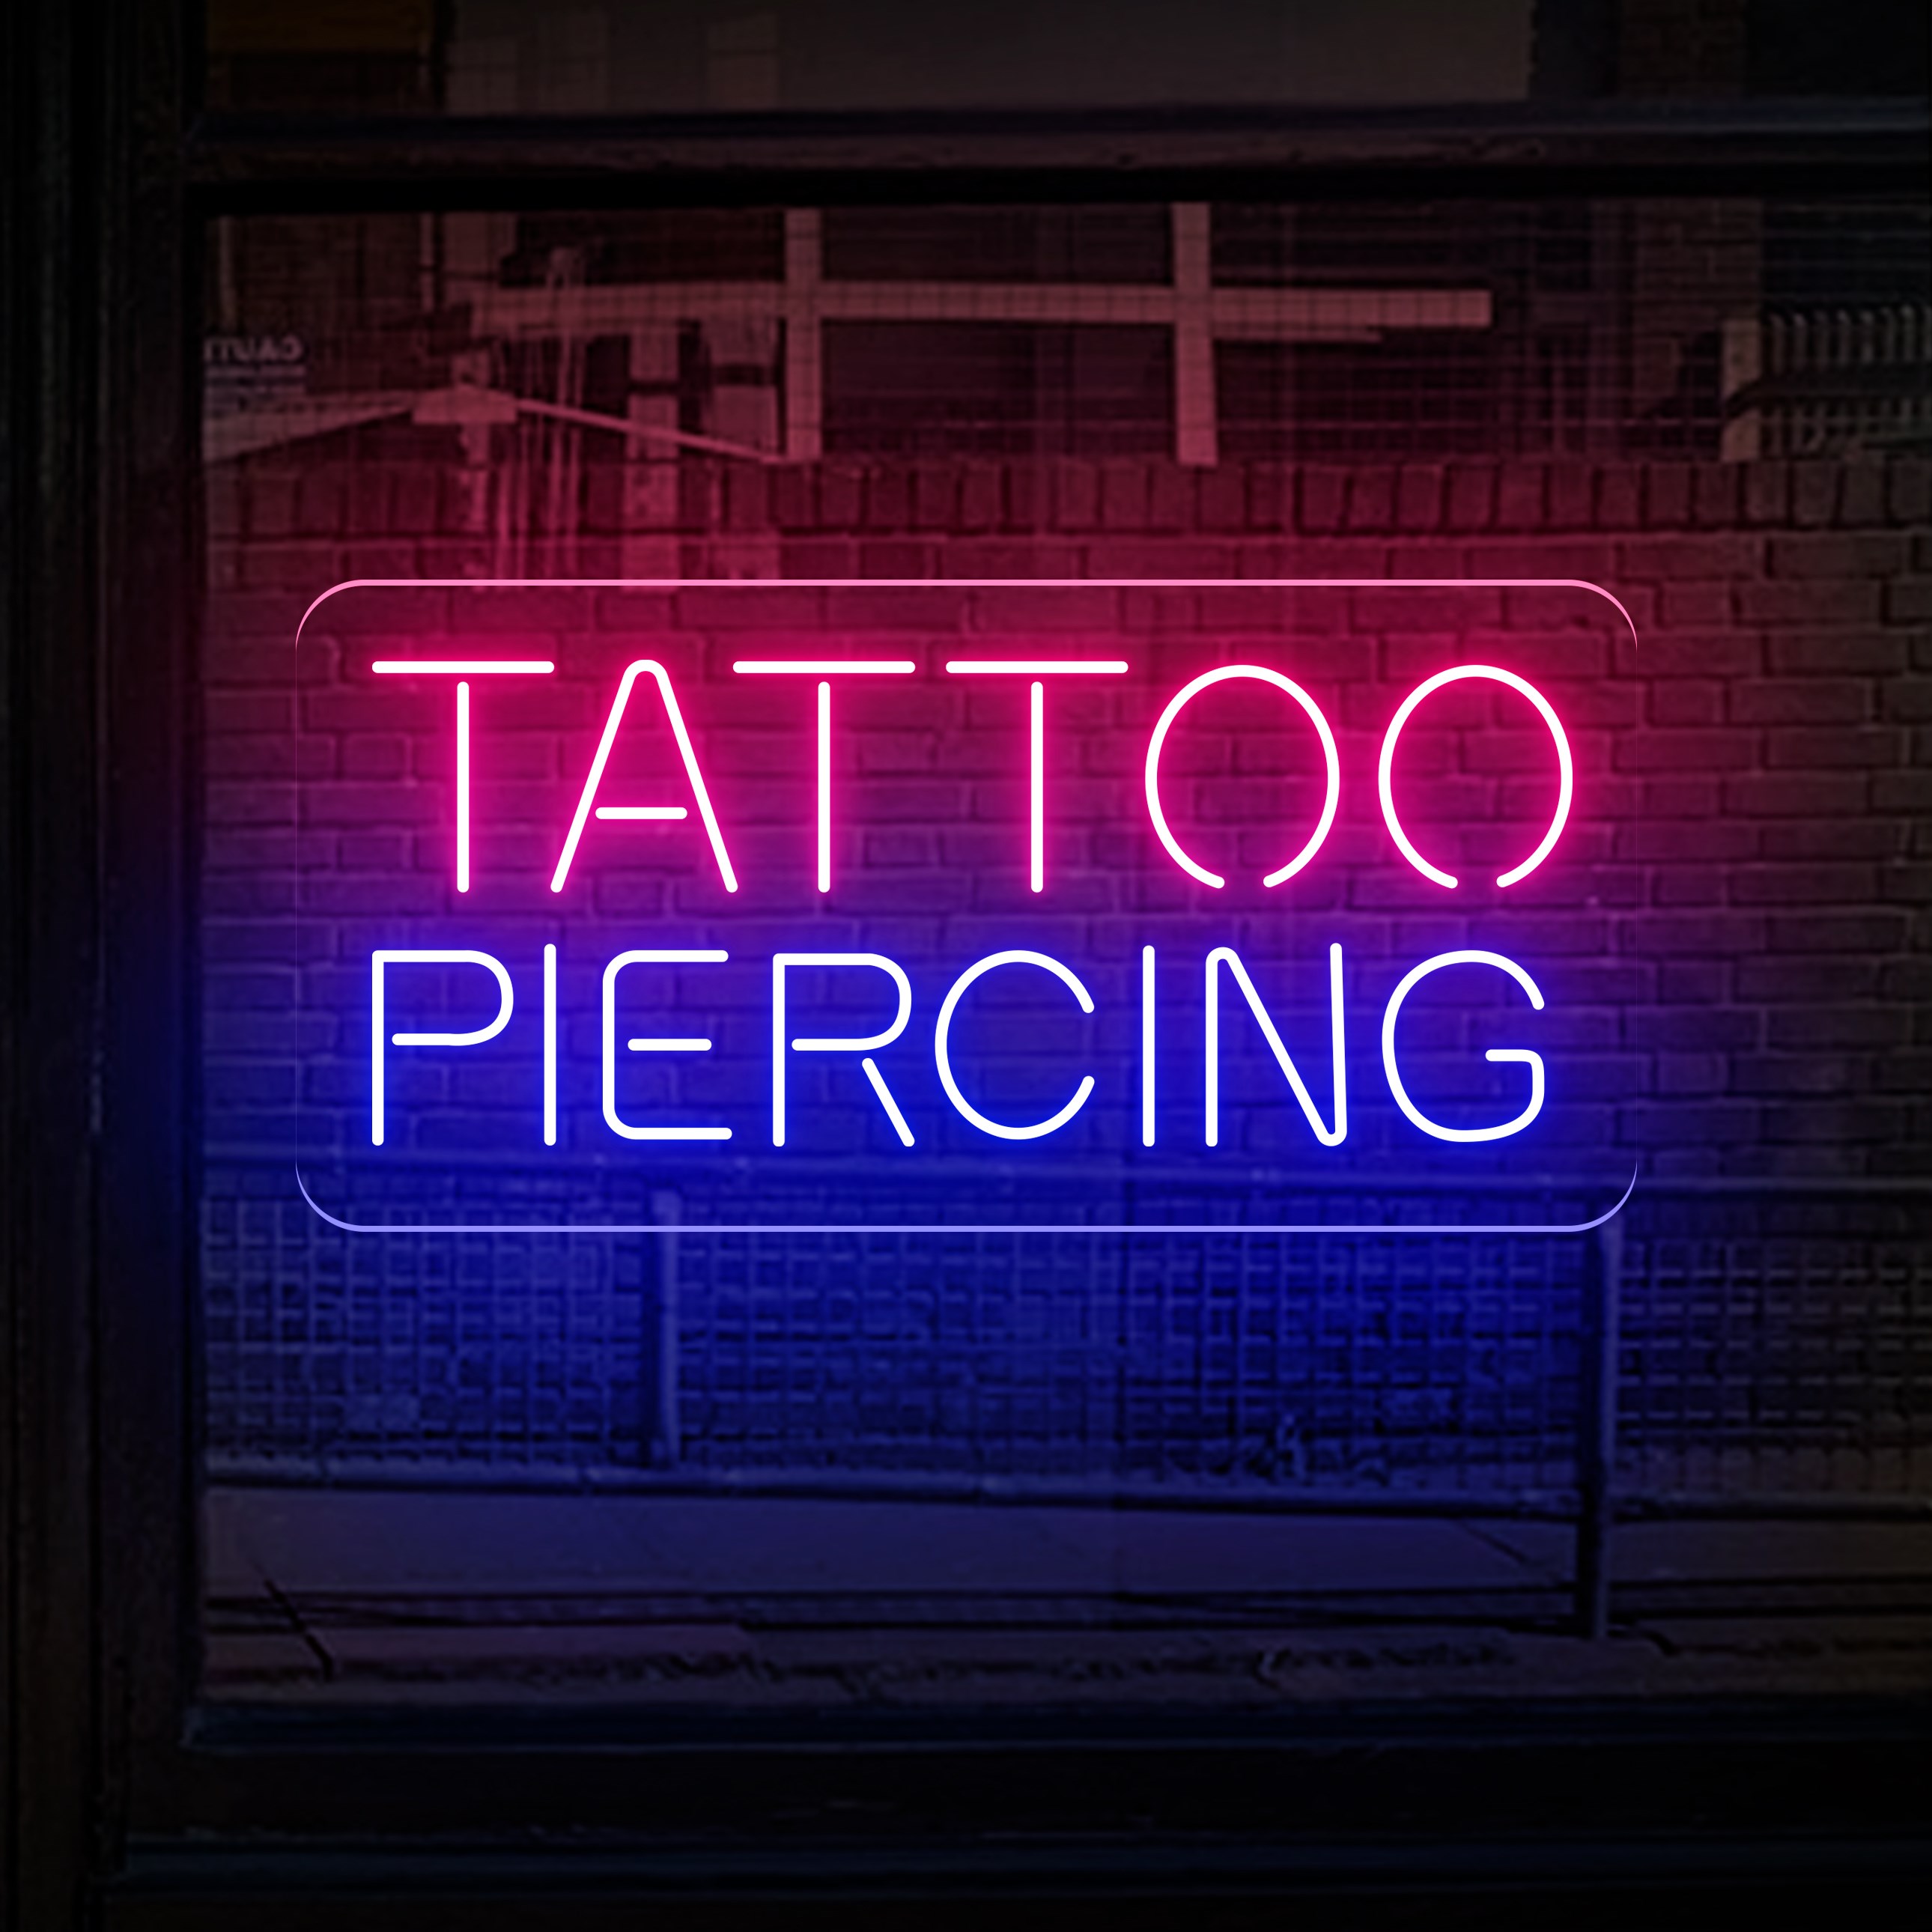 Tattoo studio logo in a neon style neon sign emblem a symbol of mans  heart is pierced by the sword bright billboards  CanStock